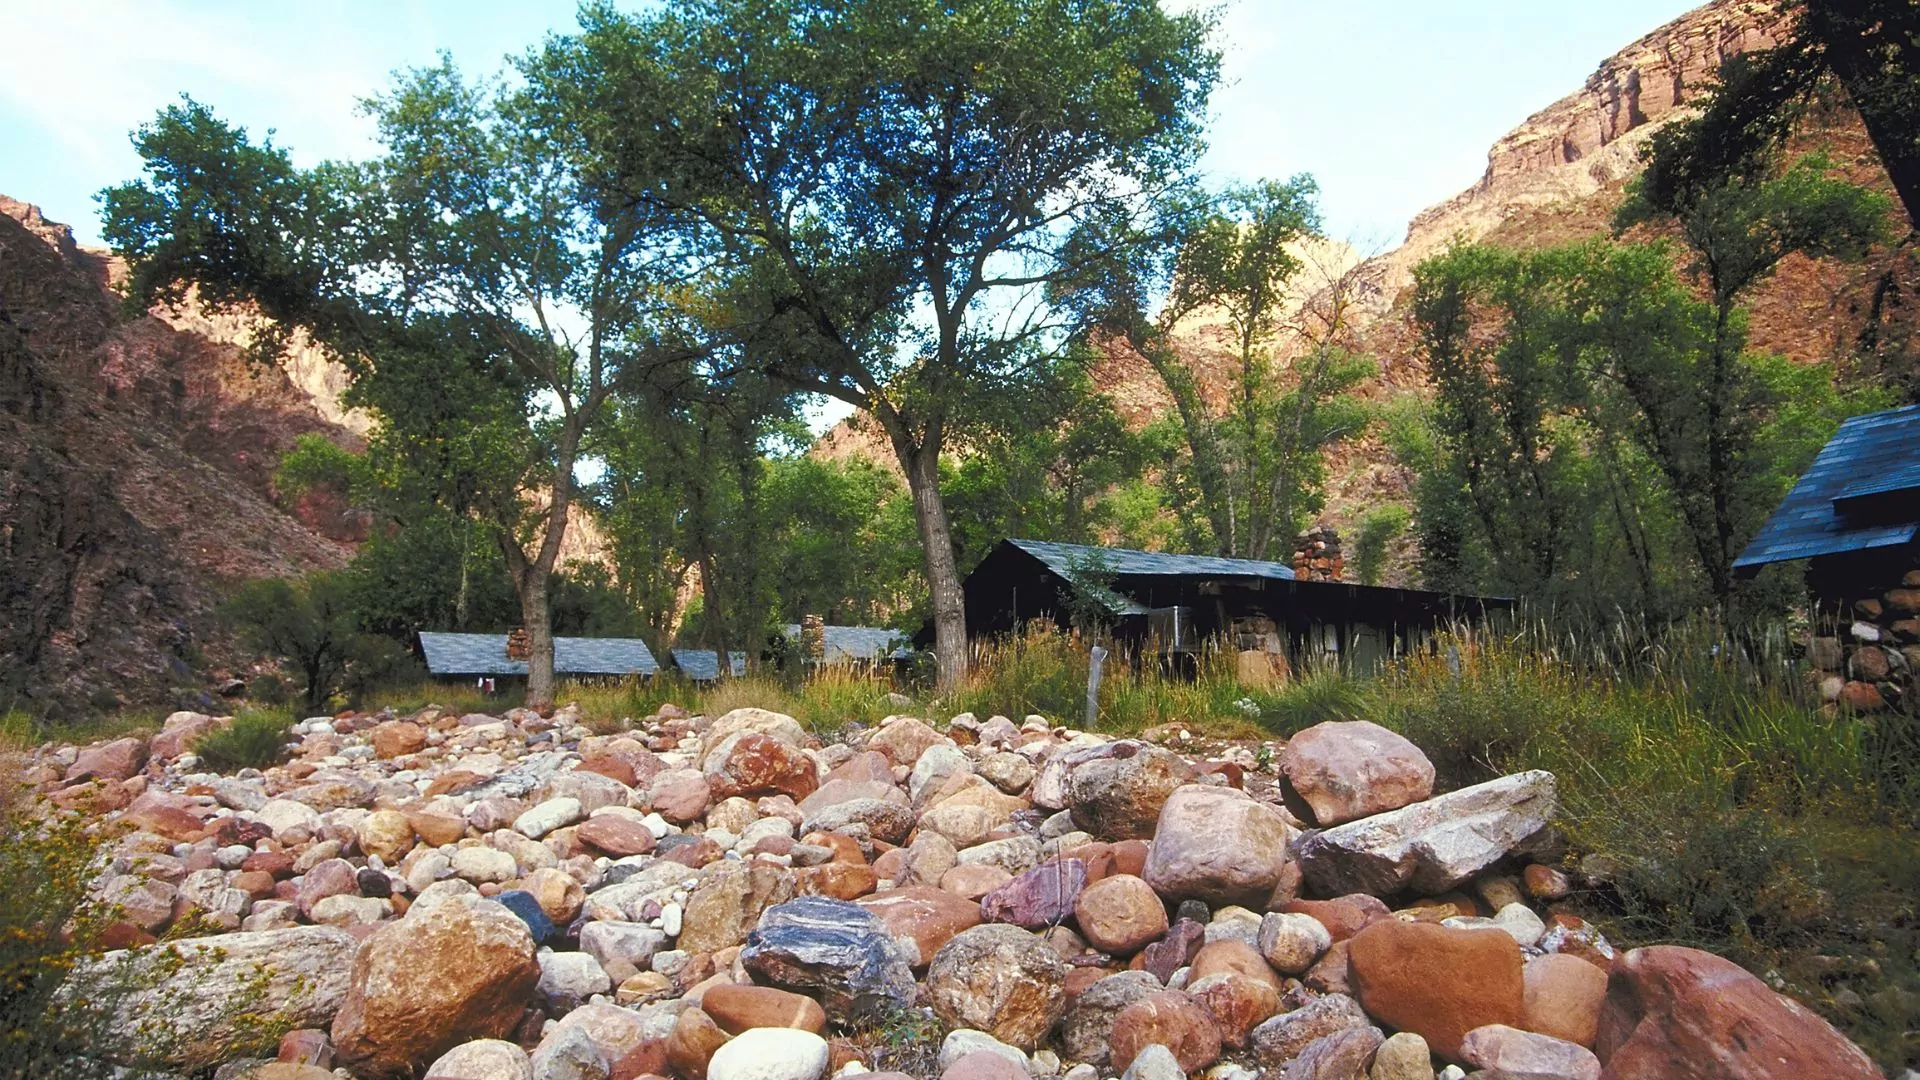 Rustic log cabins sit shaded by trees at the bottom of the Grand Canyon